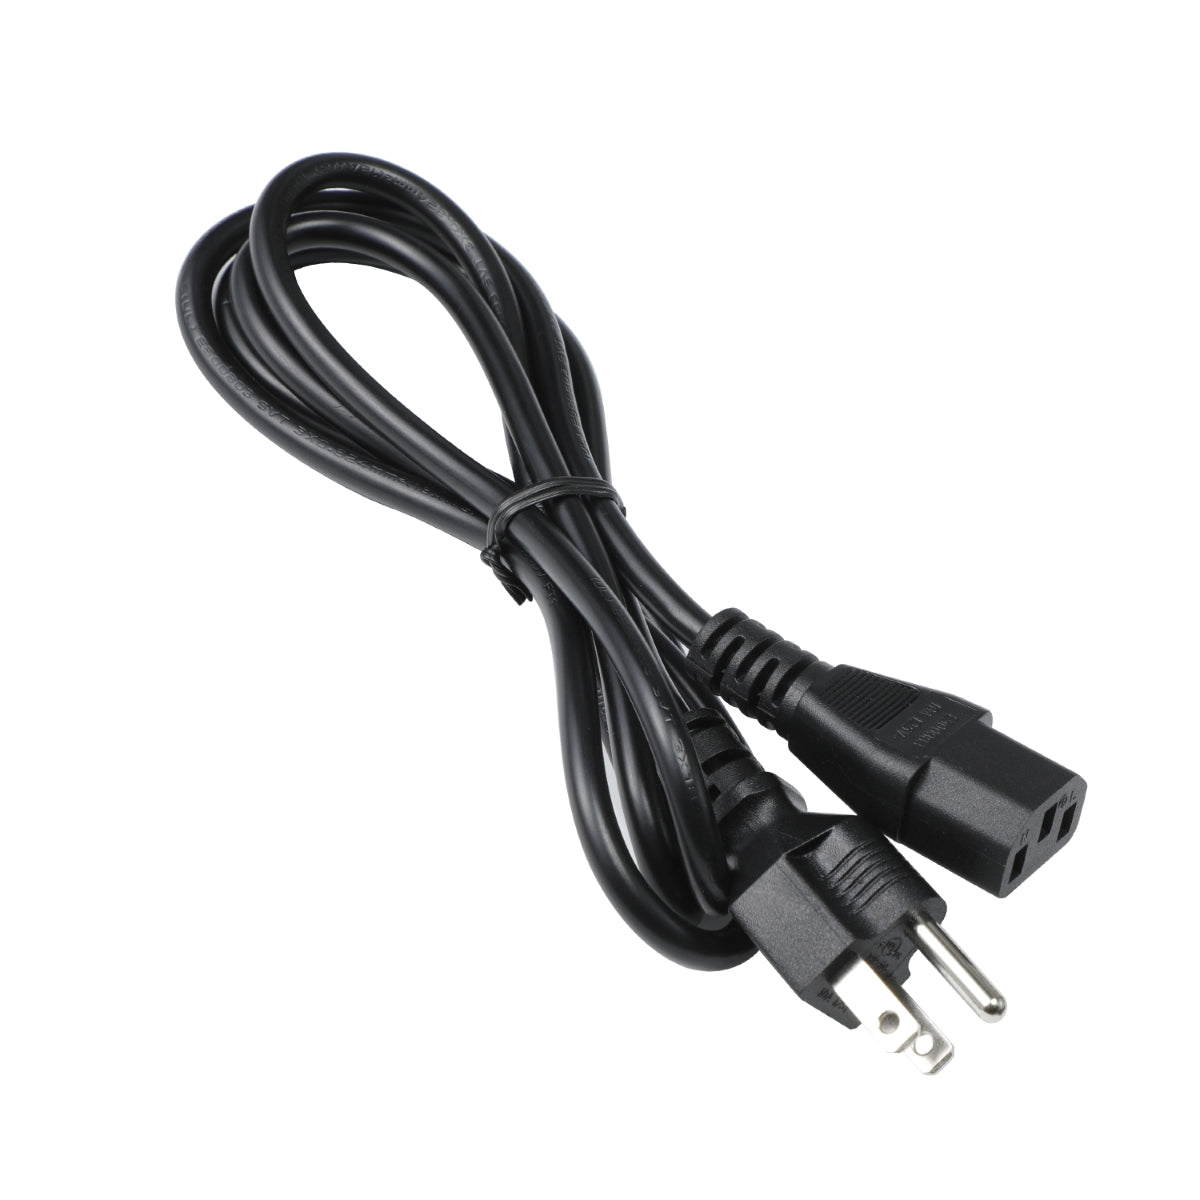 Power Cord for ViewSonic VA2446mh-LED Monitor